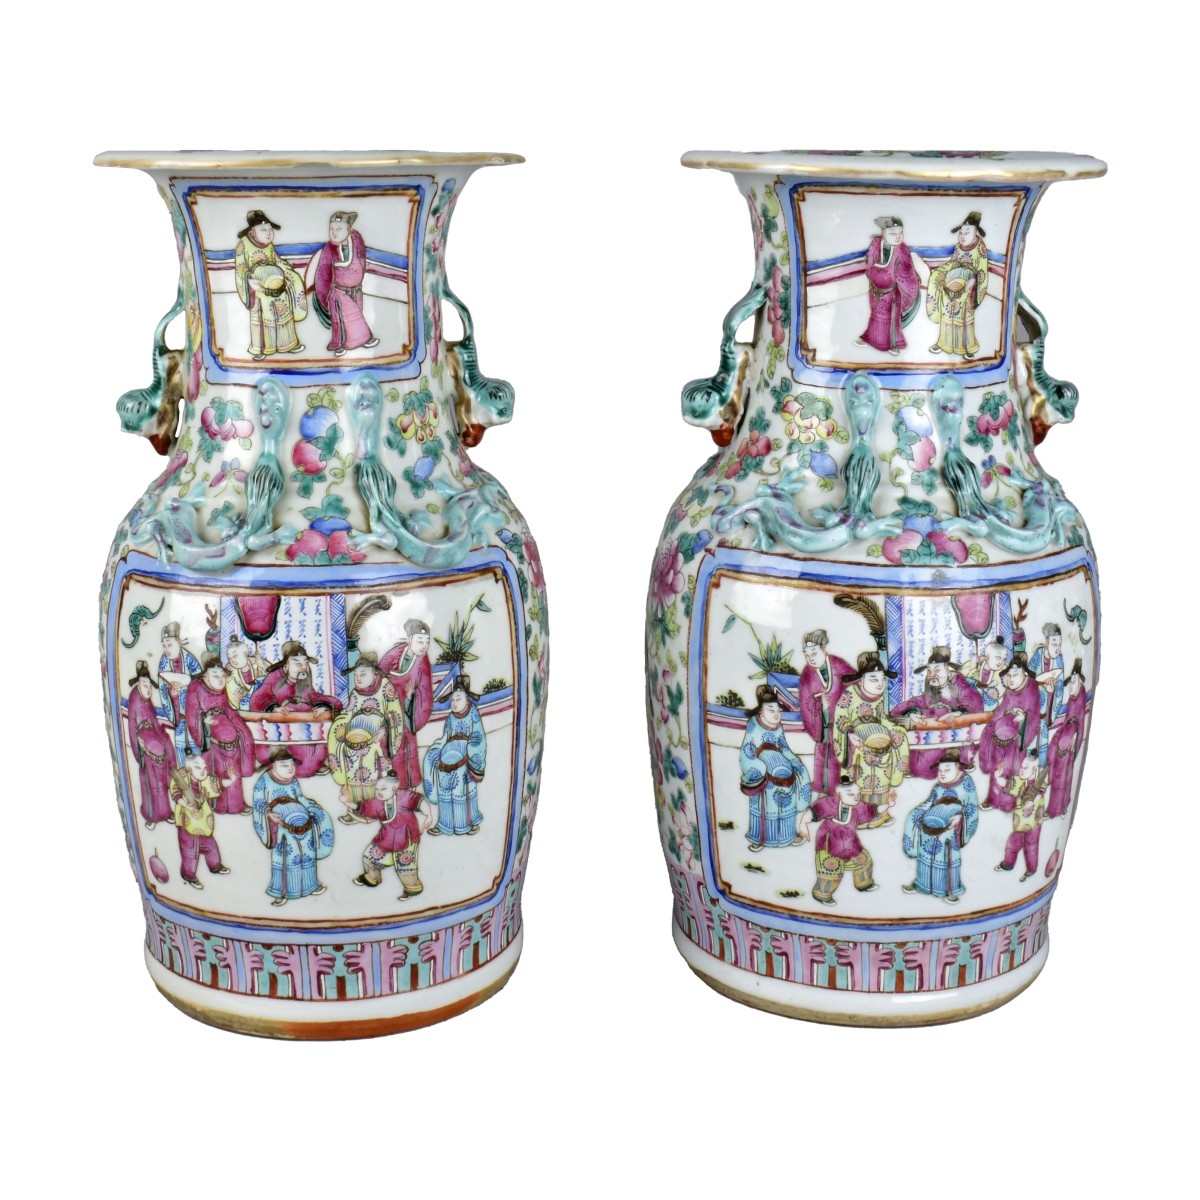 Pair of Chinese Export Rose Medallion Vases